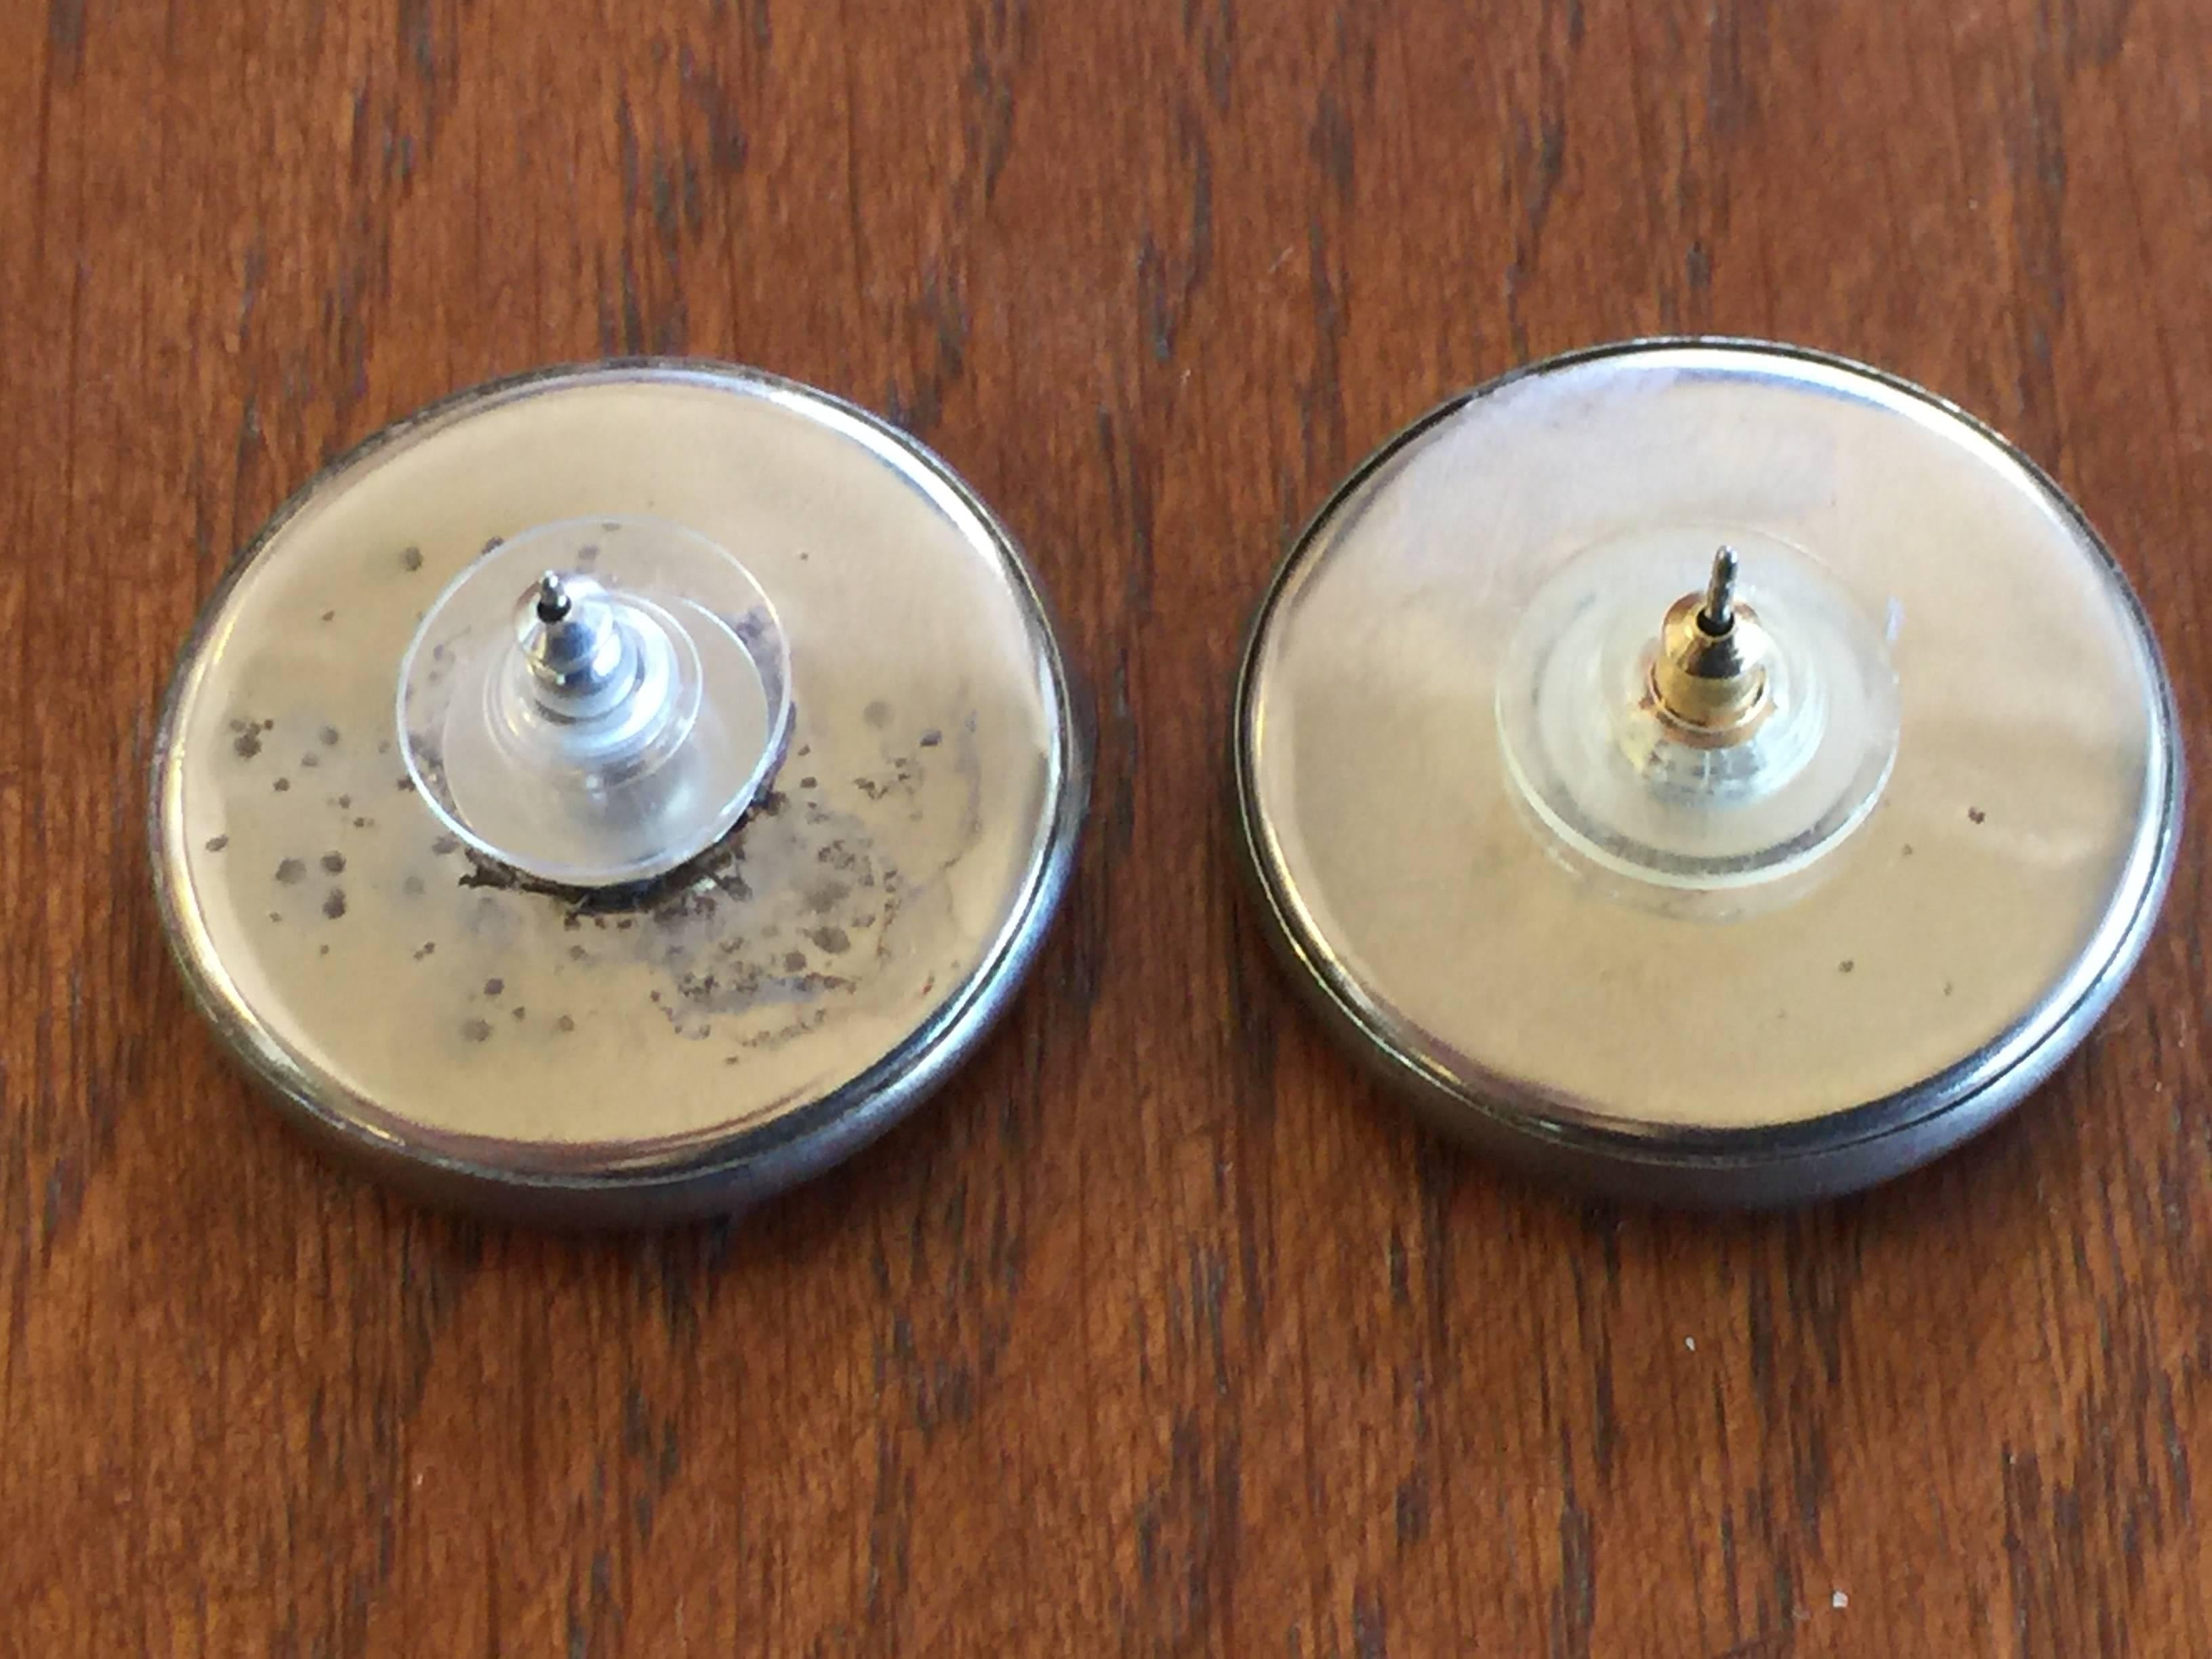 1930s Art Deco Silver Overlay Celluloid Pierced Earrings In Excellent Condition For Sale In Palm Springs, CA